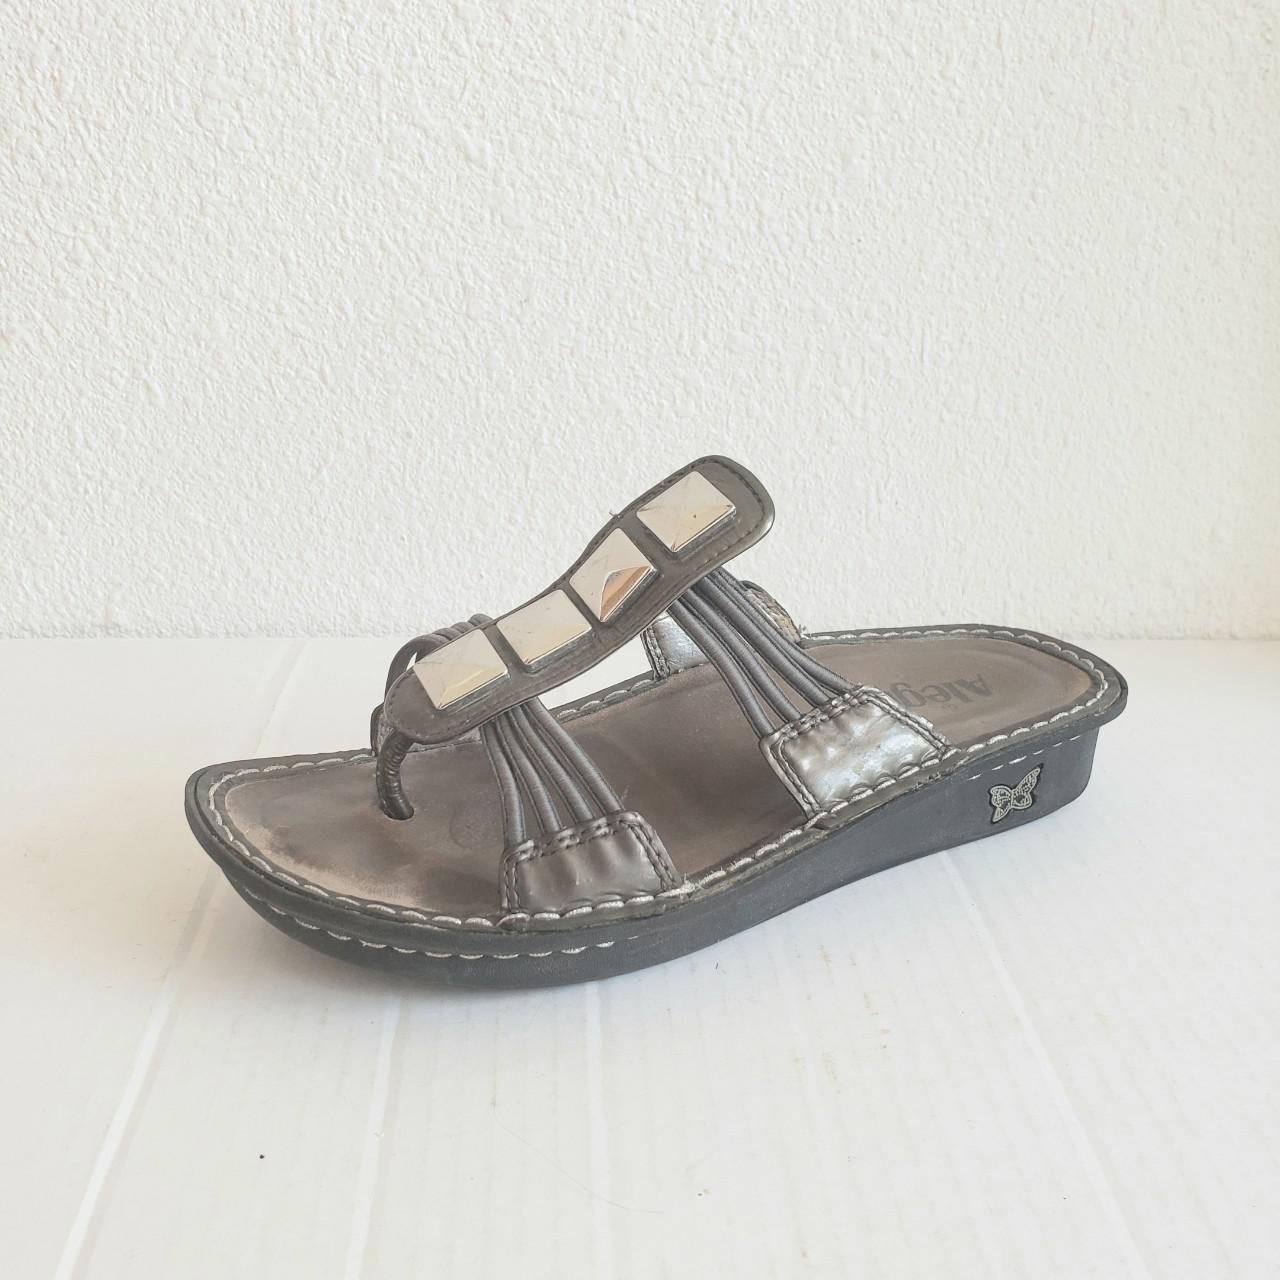 Allegria Womens Gray Metalic Leather Upper and... - Depop